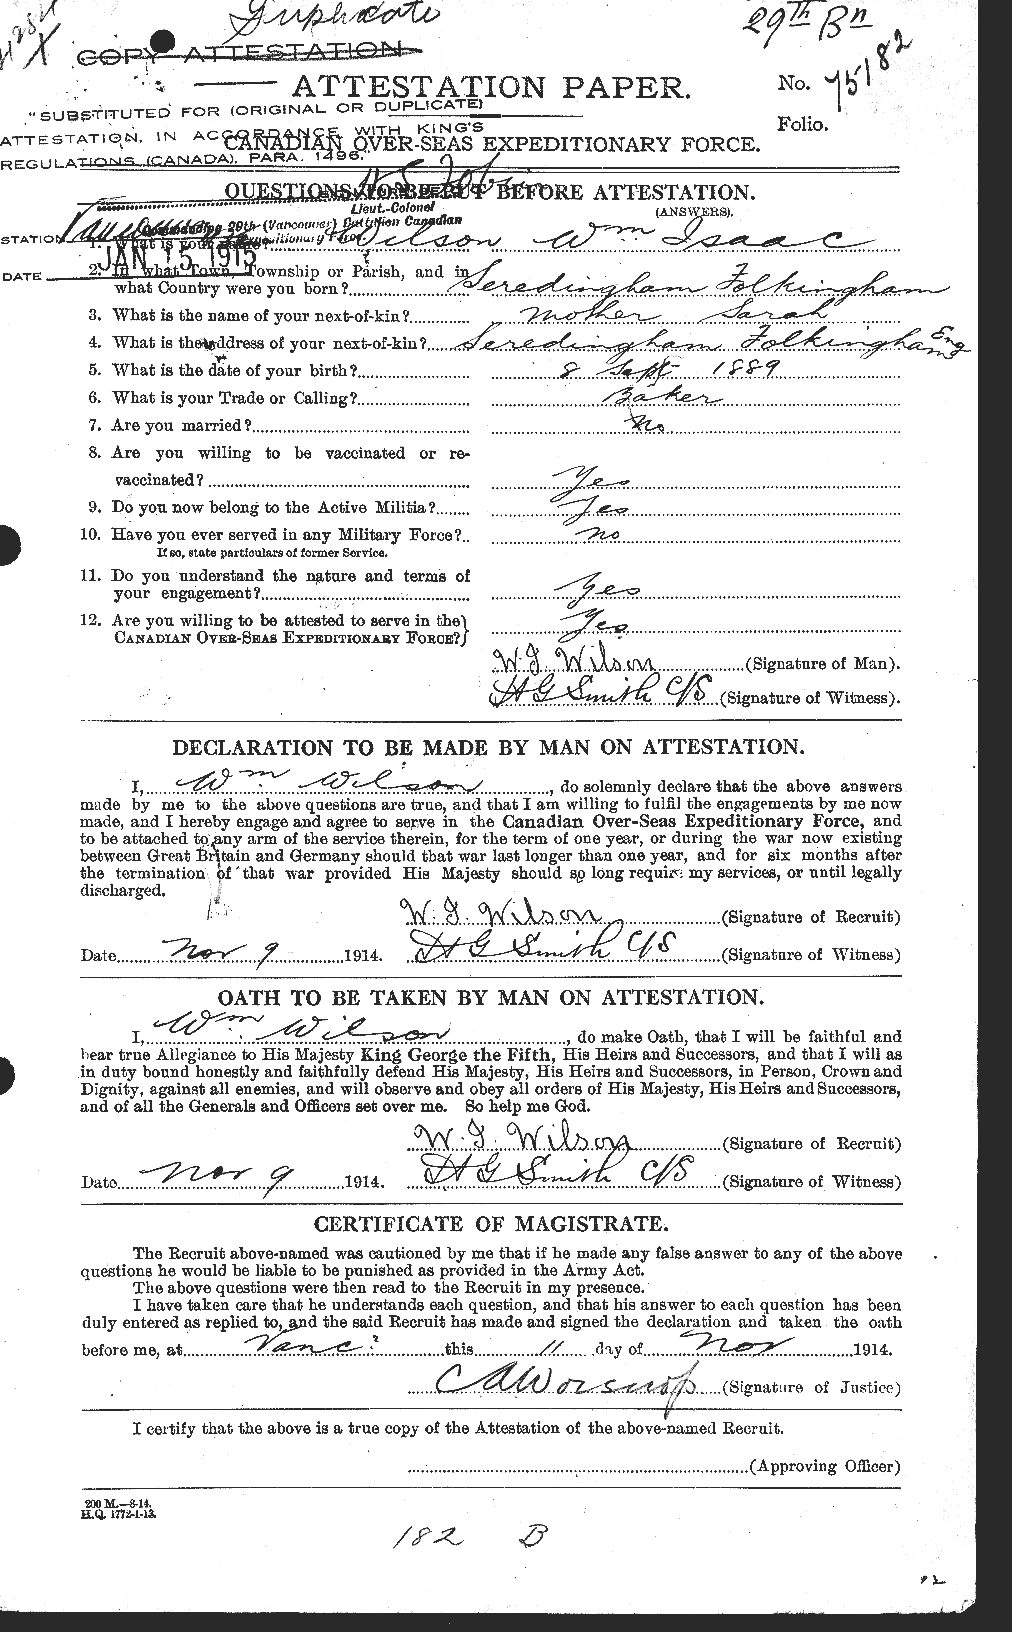 Personnel Records of the First World War - CEF 682039a